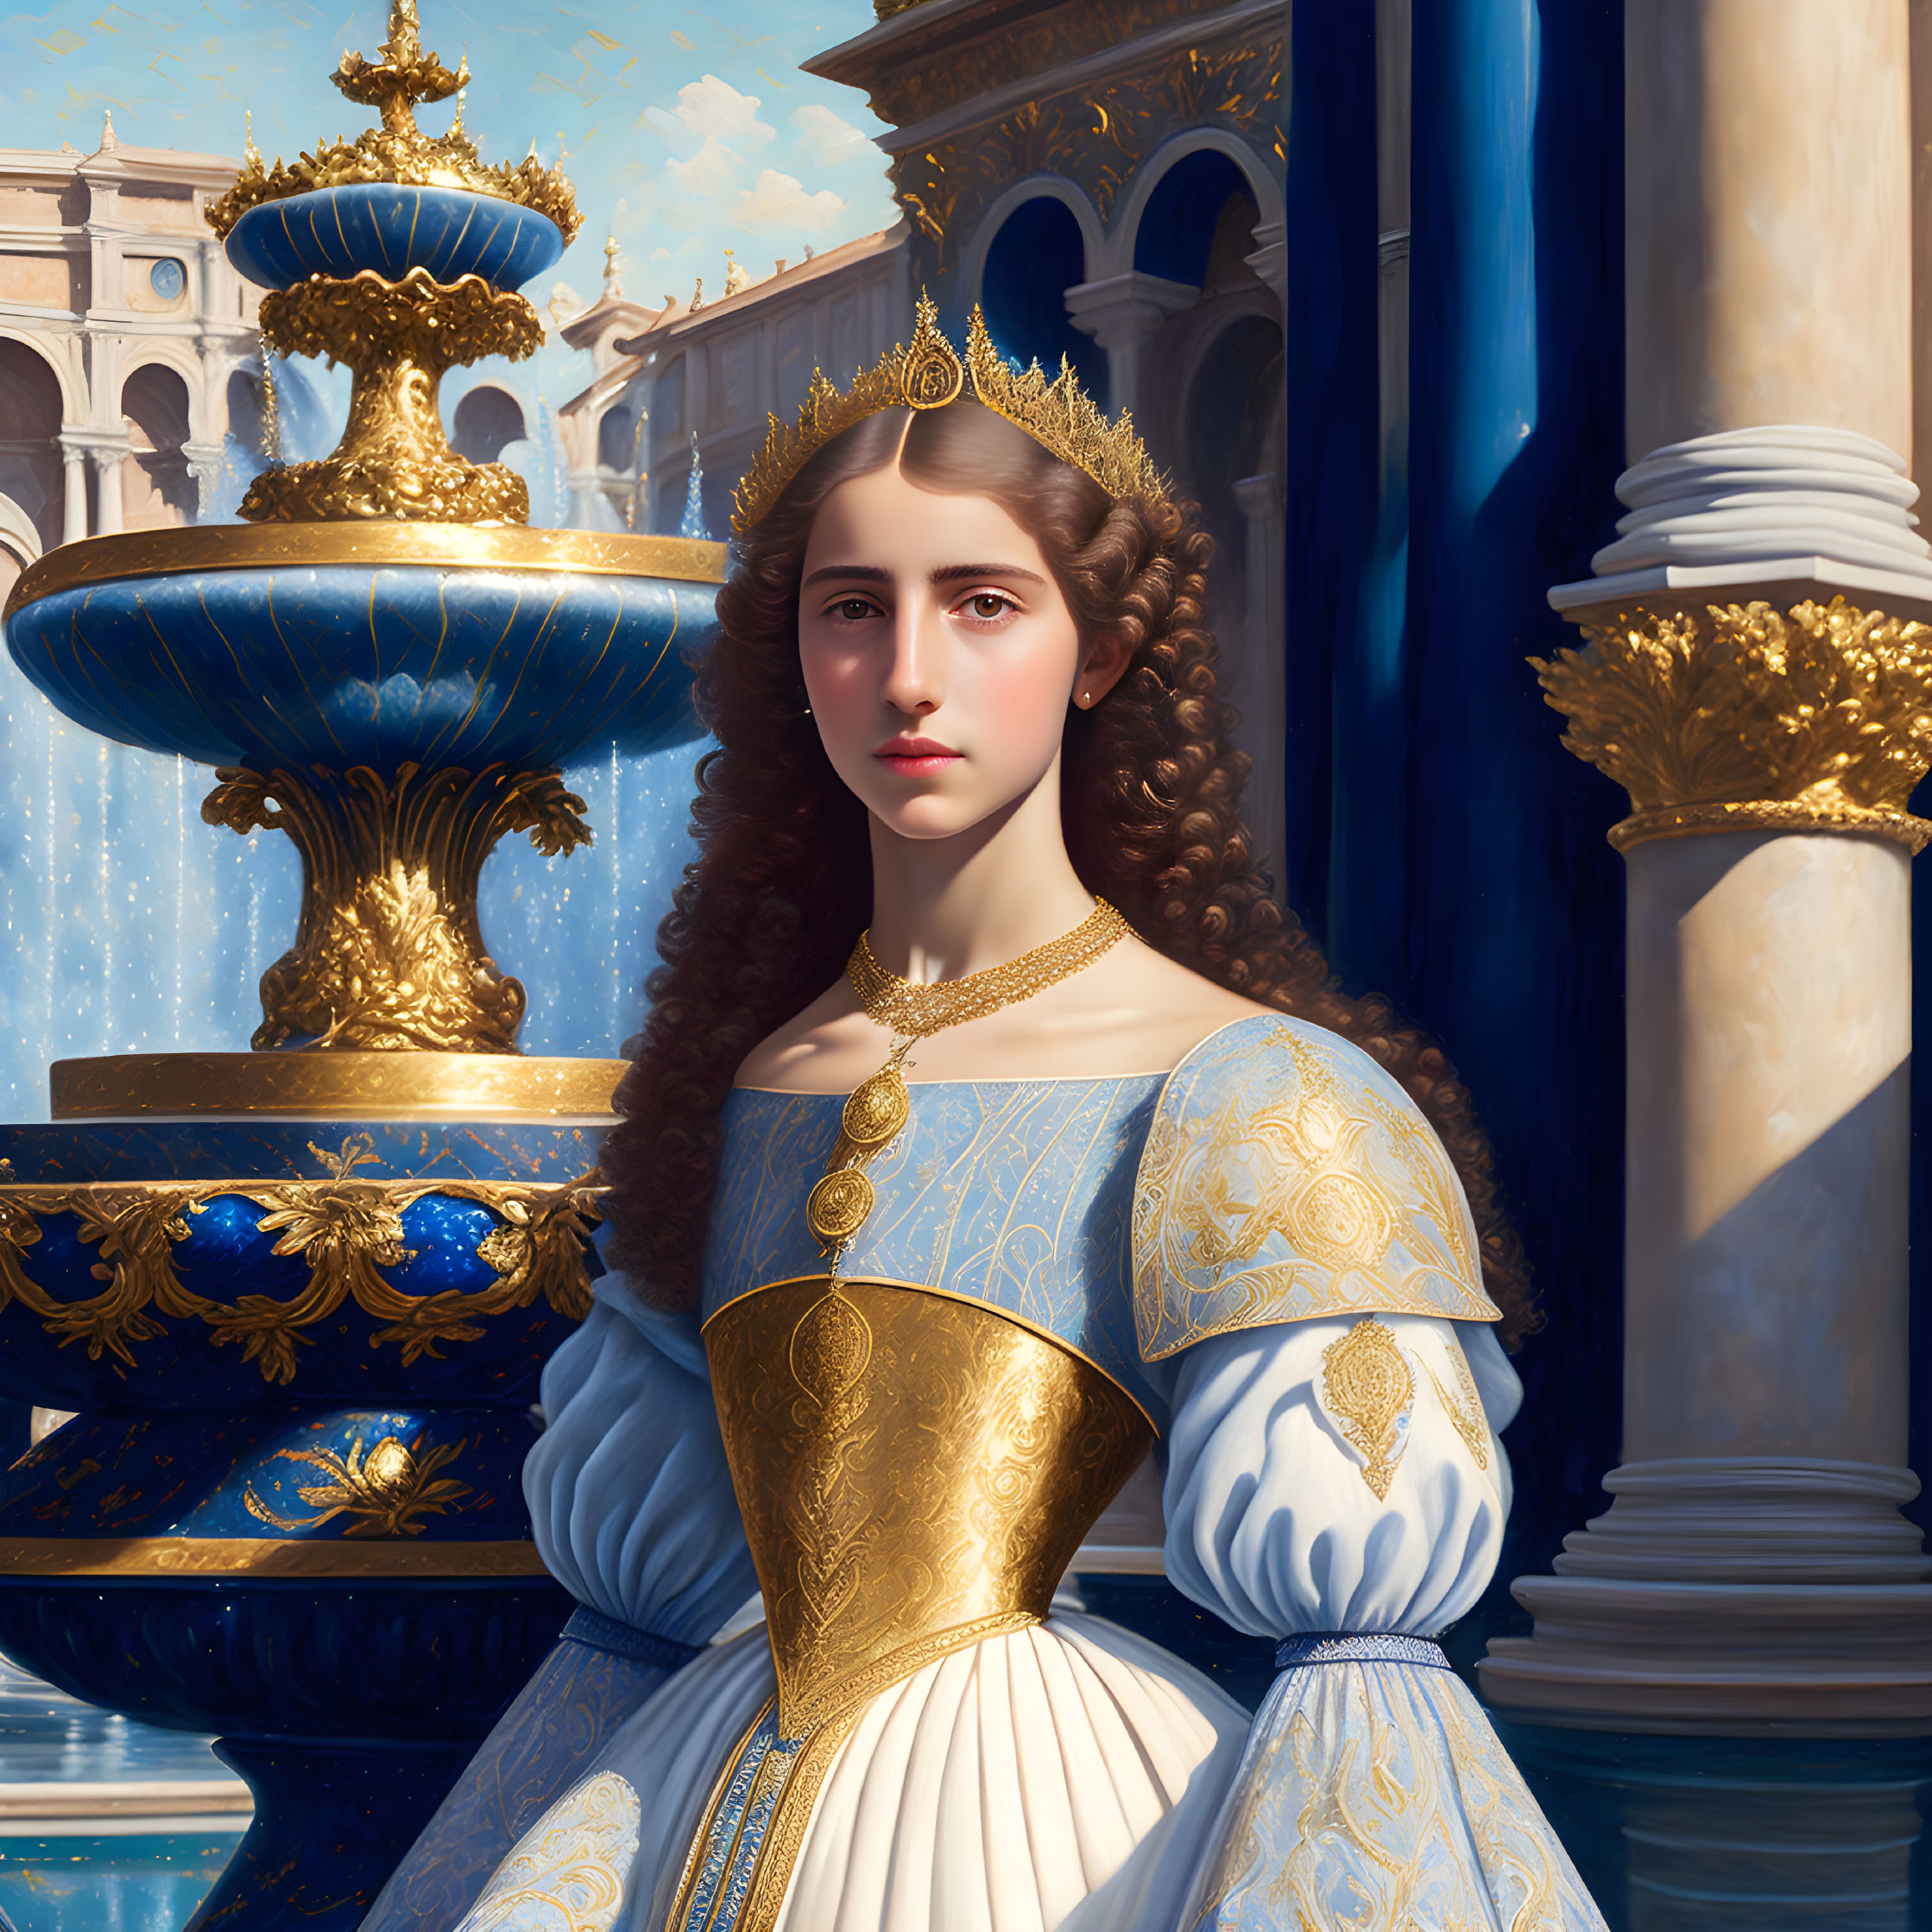 Regal woman in Renaissance gown with golden crown and jewelry by fountain